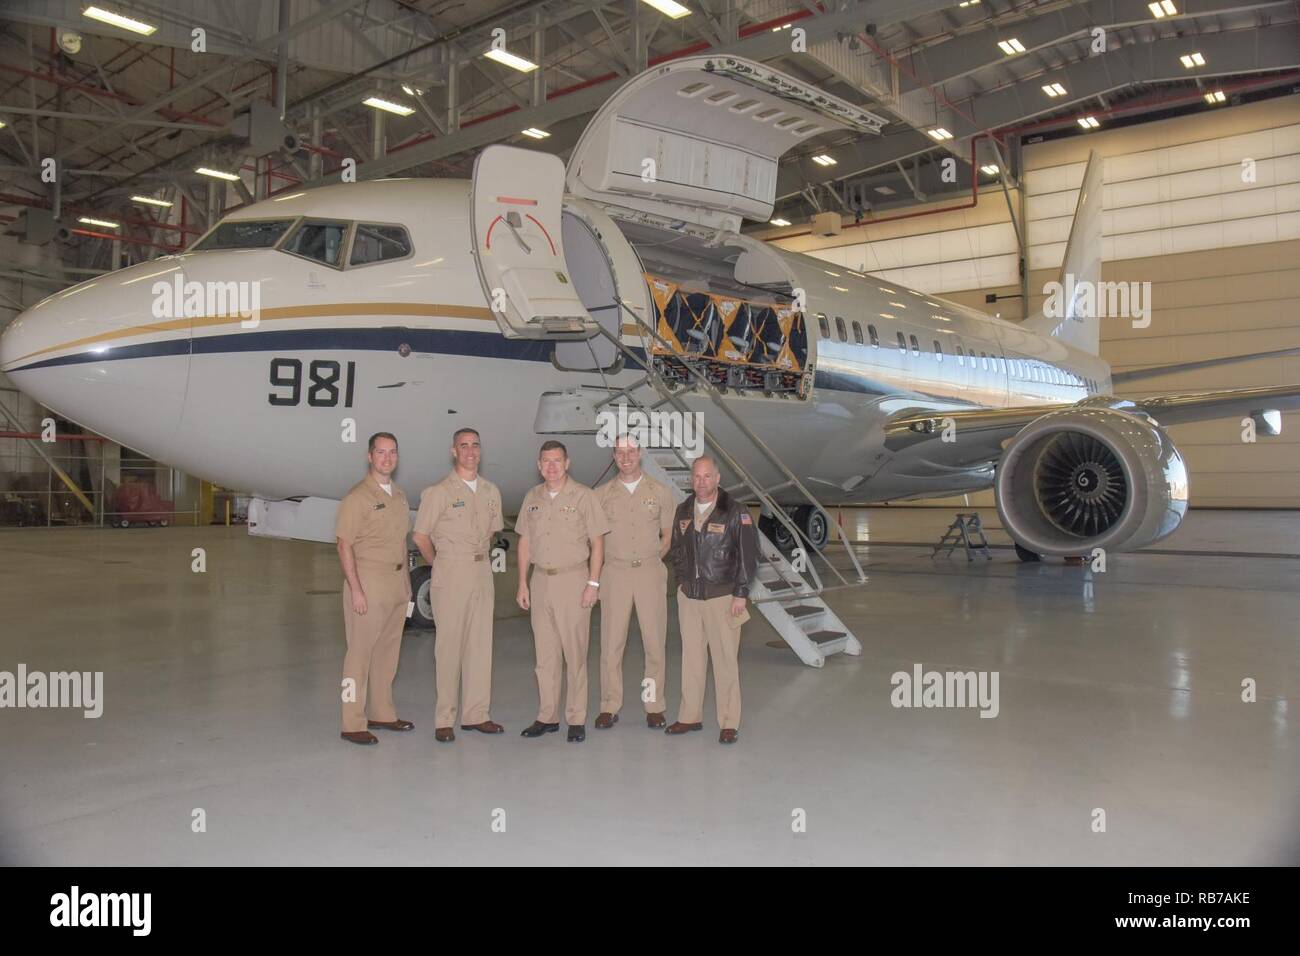 FORT WORTH, Texas (Dec. 1, 2016) Vice Adm. Luke McCollum, chief of Navy Reserve/commander, Navy Reserve Force, poses for a group photo with the Fleet Logistics Support Squadron (VR) 59 chain-of-command in front of a C-40A 'Clipper' at Naval Air Station Fort Worth Joint Reserve Base.  McCollum, formerly deputy commander of the Navy Expeditionary Combat Command, became the 14th chief of Navy Reserve/commander, Navy Reserve Force Sept. 2016. Stock Photo